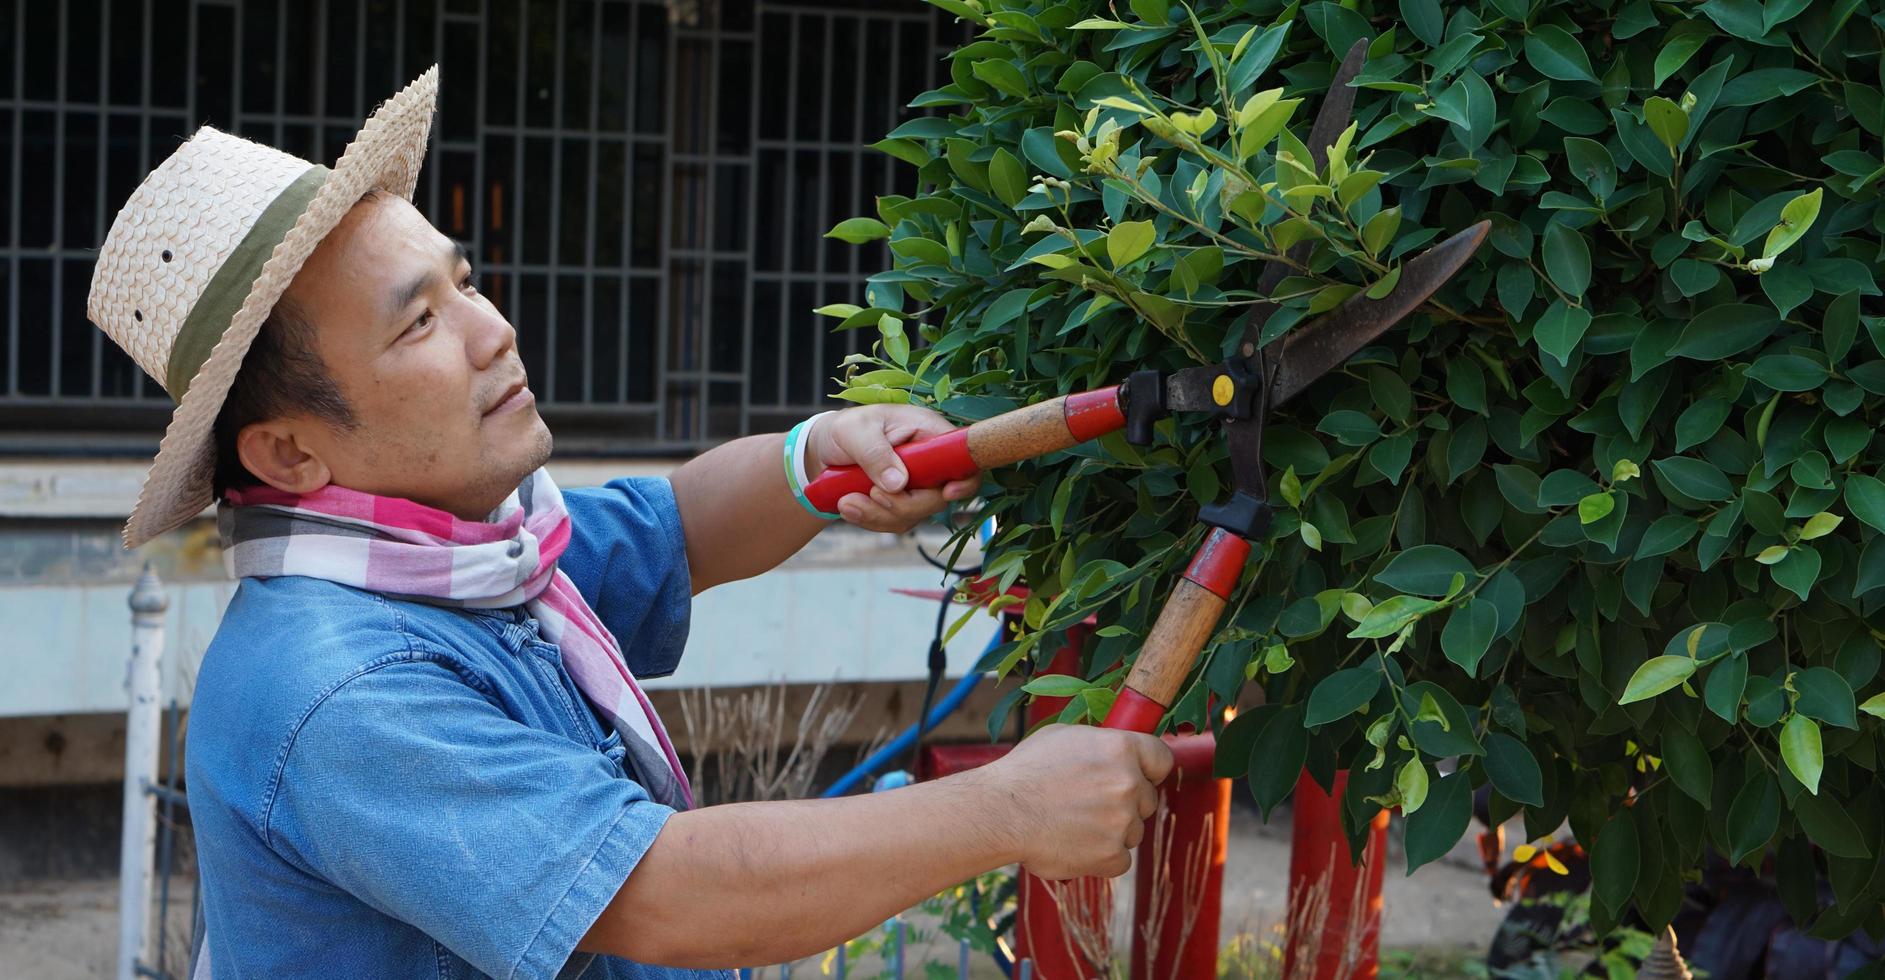 Asian middle aged man is using pruning shears to cut and look after the bush and ficus tree in his home area, Soft and selective focus, free times activity concept. photo